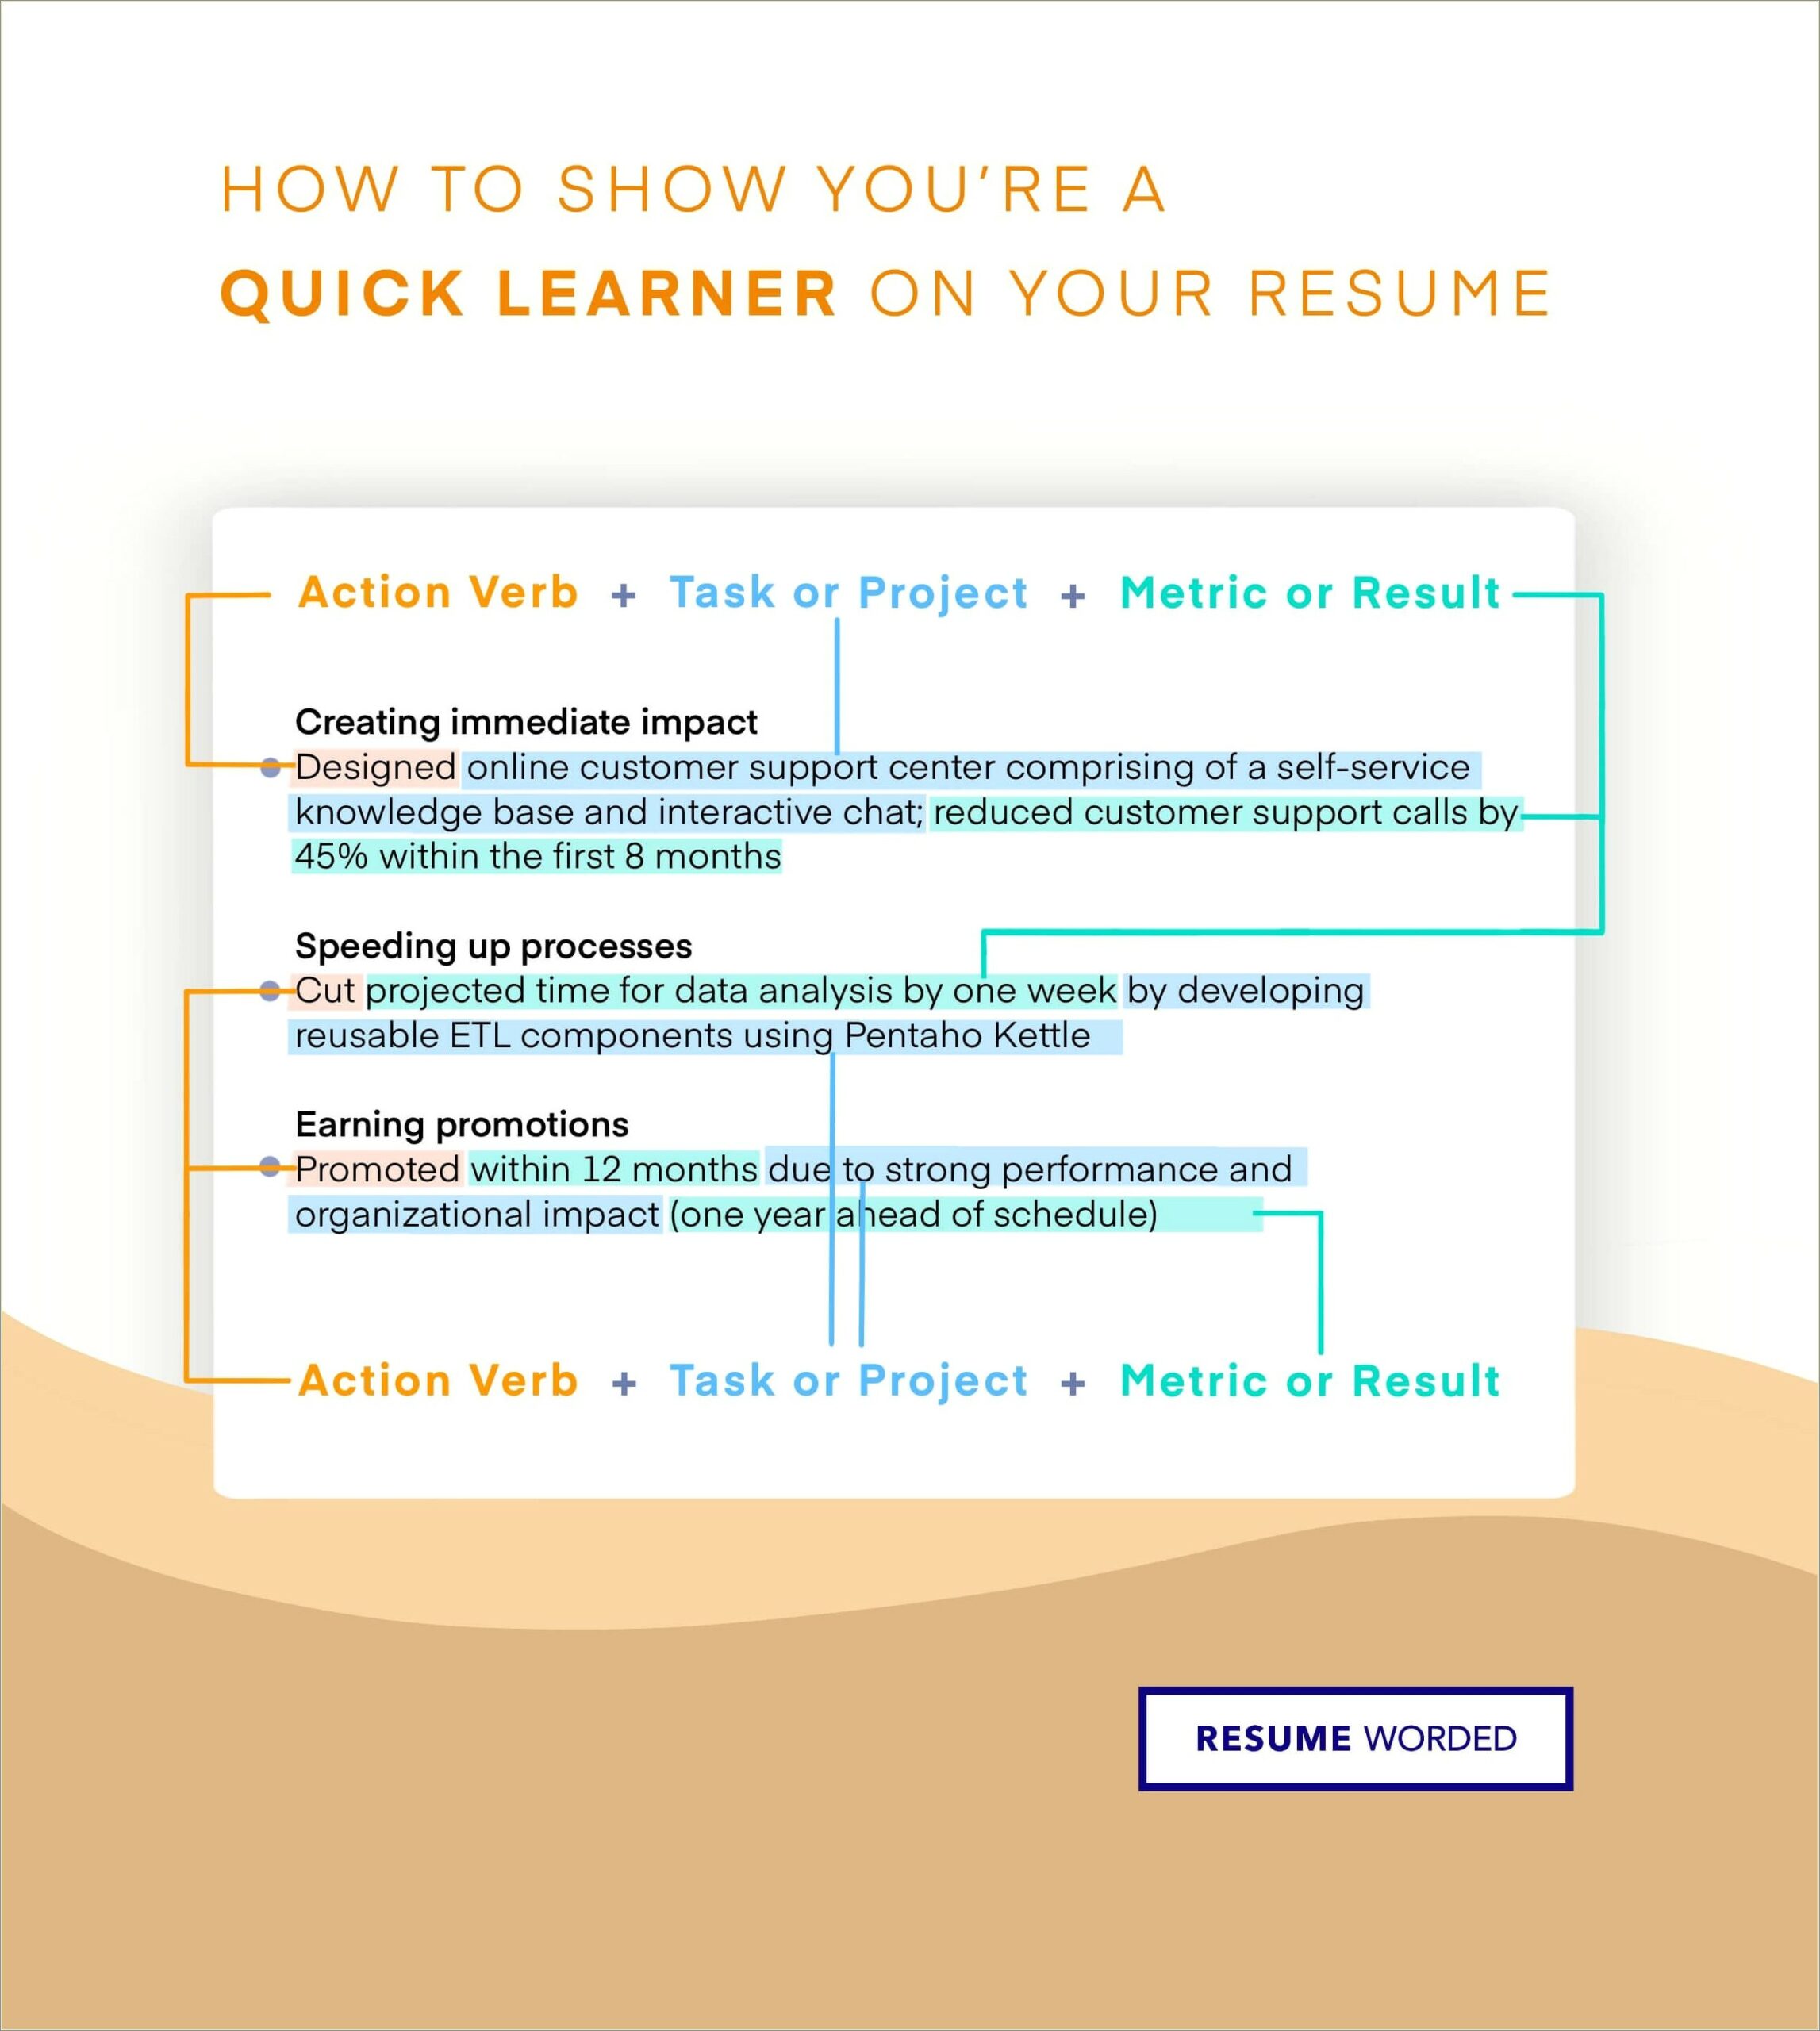 Descriptive Ways To Write Fast Learner On Resume